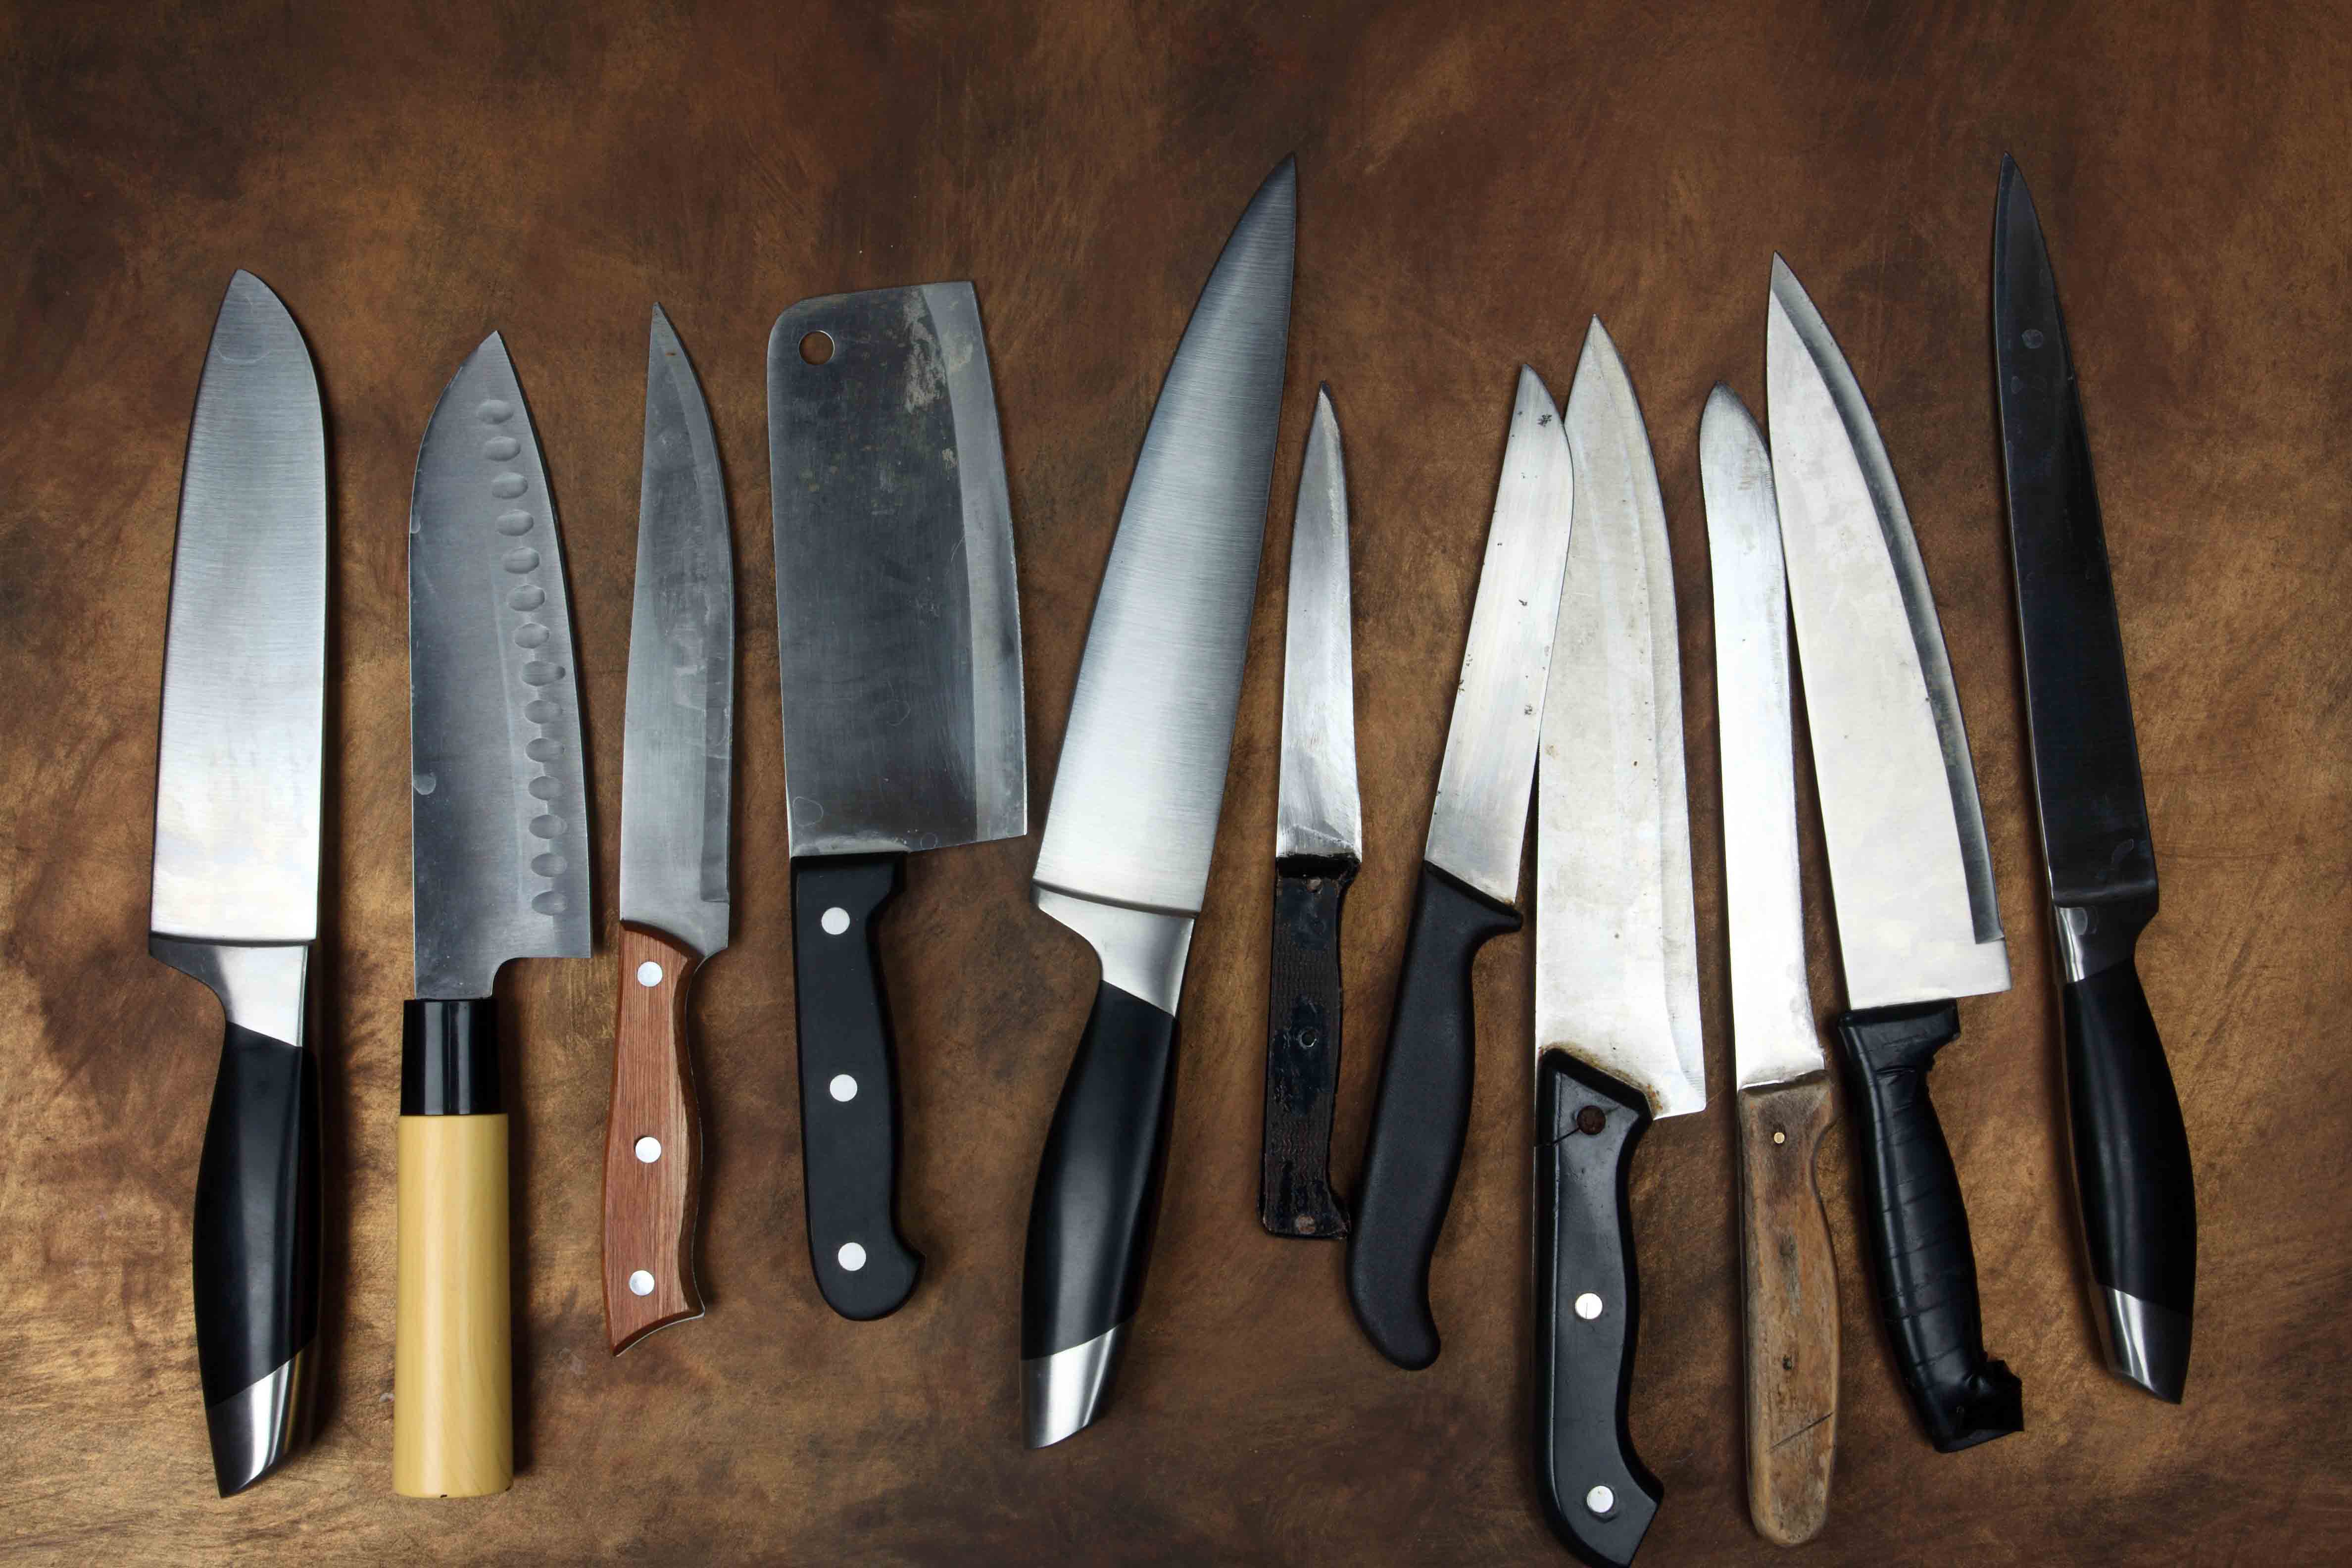 3 of the best kitchen knifes, which is the best